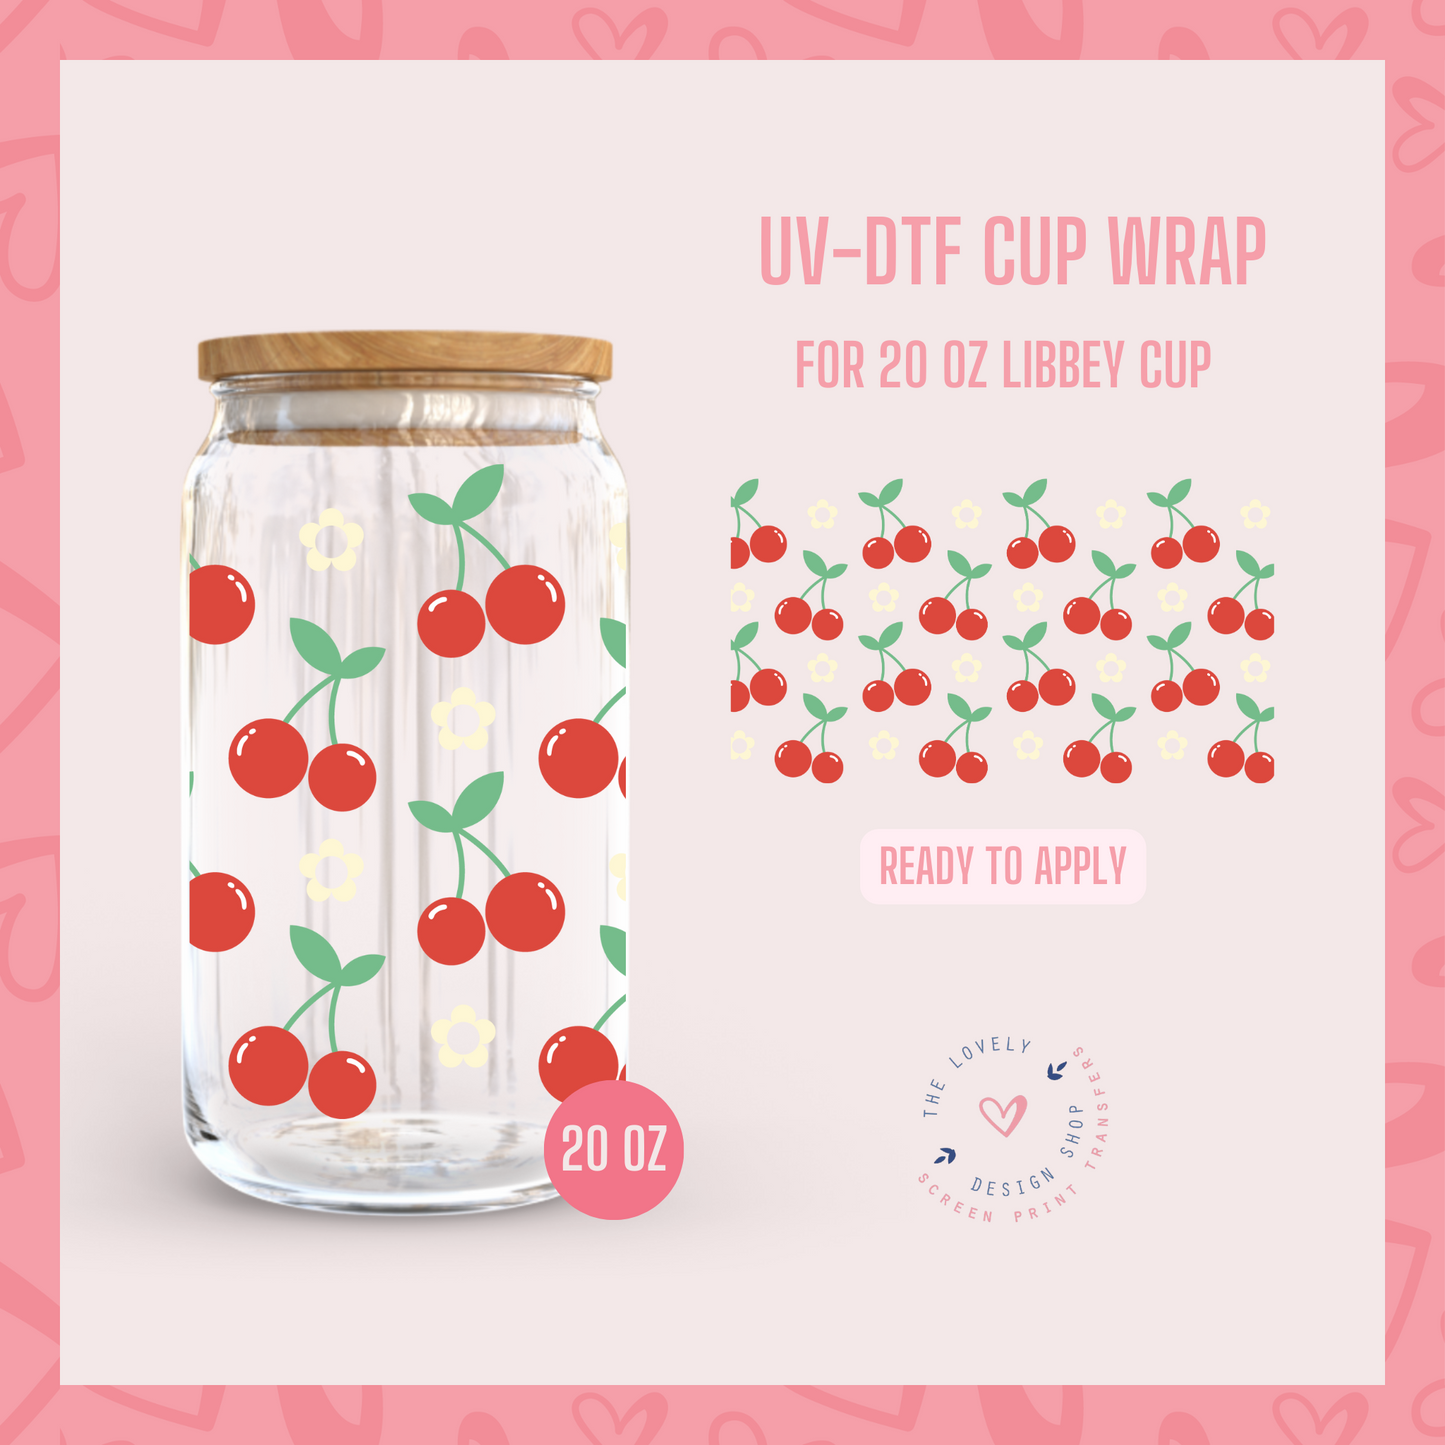 Cherries - UV DTF 20 oz Libbey Cup Wrap (Ready to Ship) Mar 4